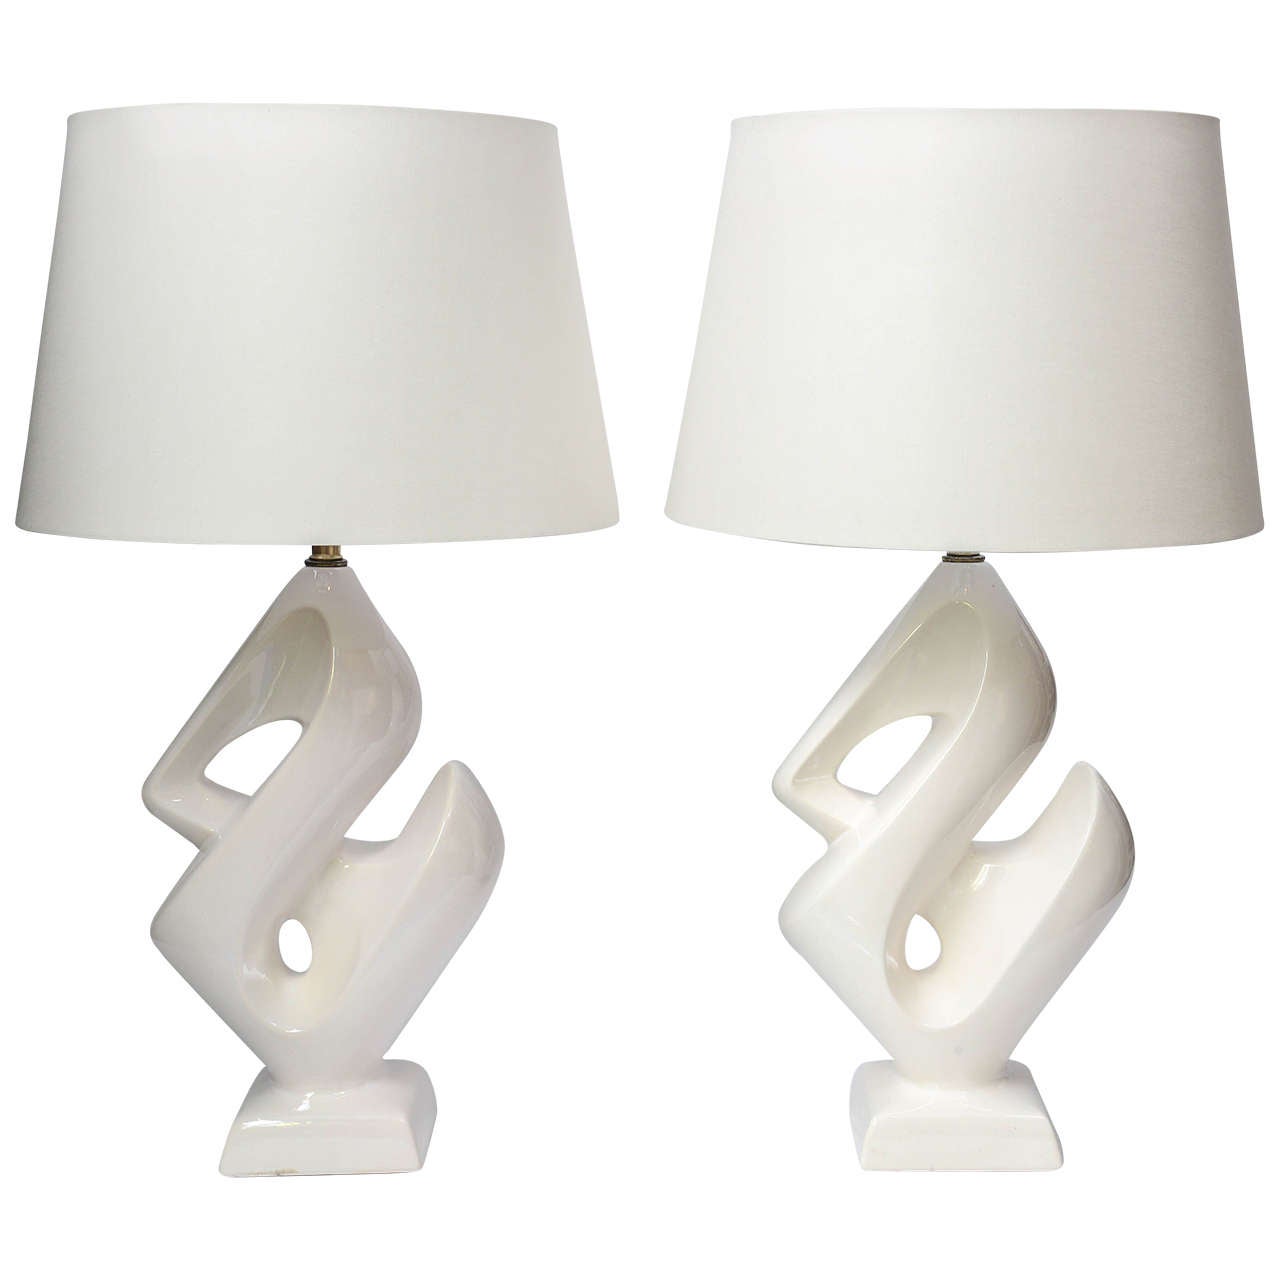 Vintage Pair of White Ceramic "Ampersand" Table Lamps